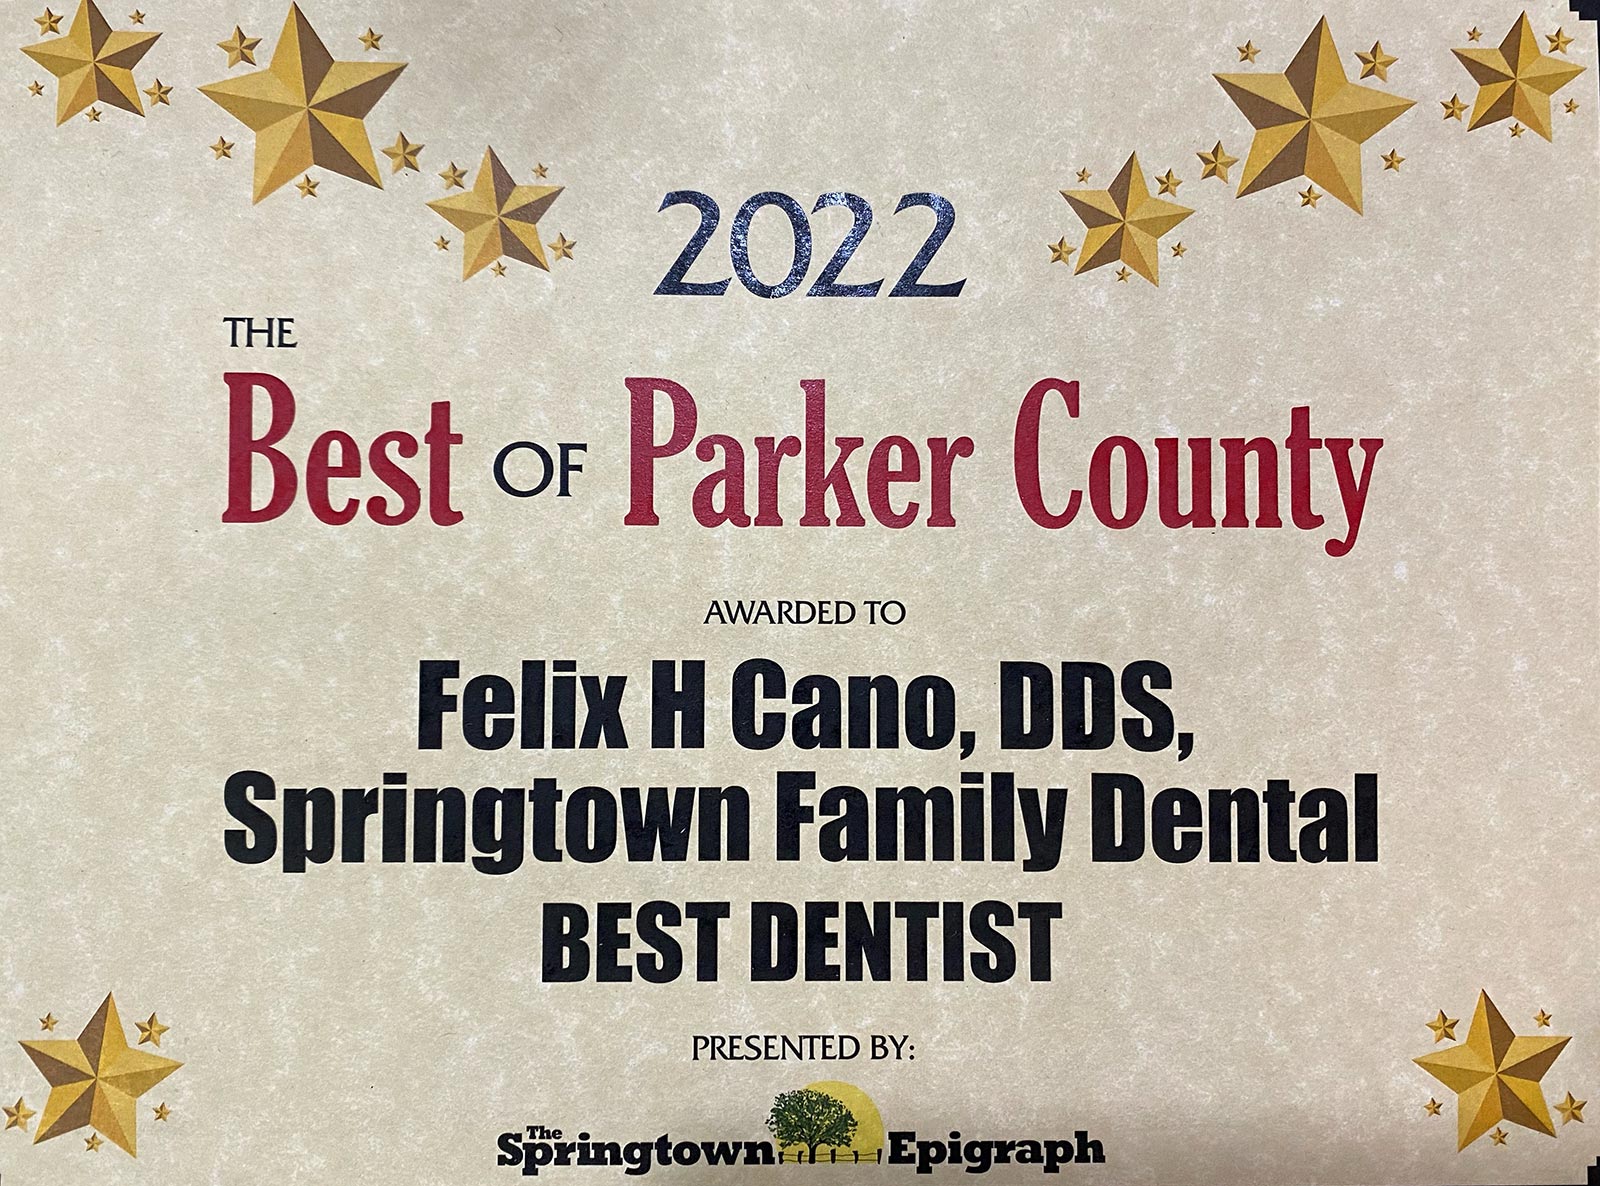 Springtown Epigraph Awards Best Dentist in Parker County to Felix Cano at Springtown Family Dental